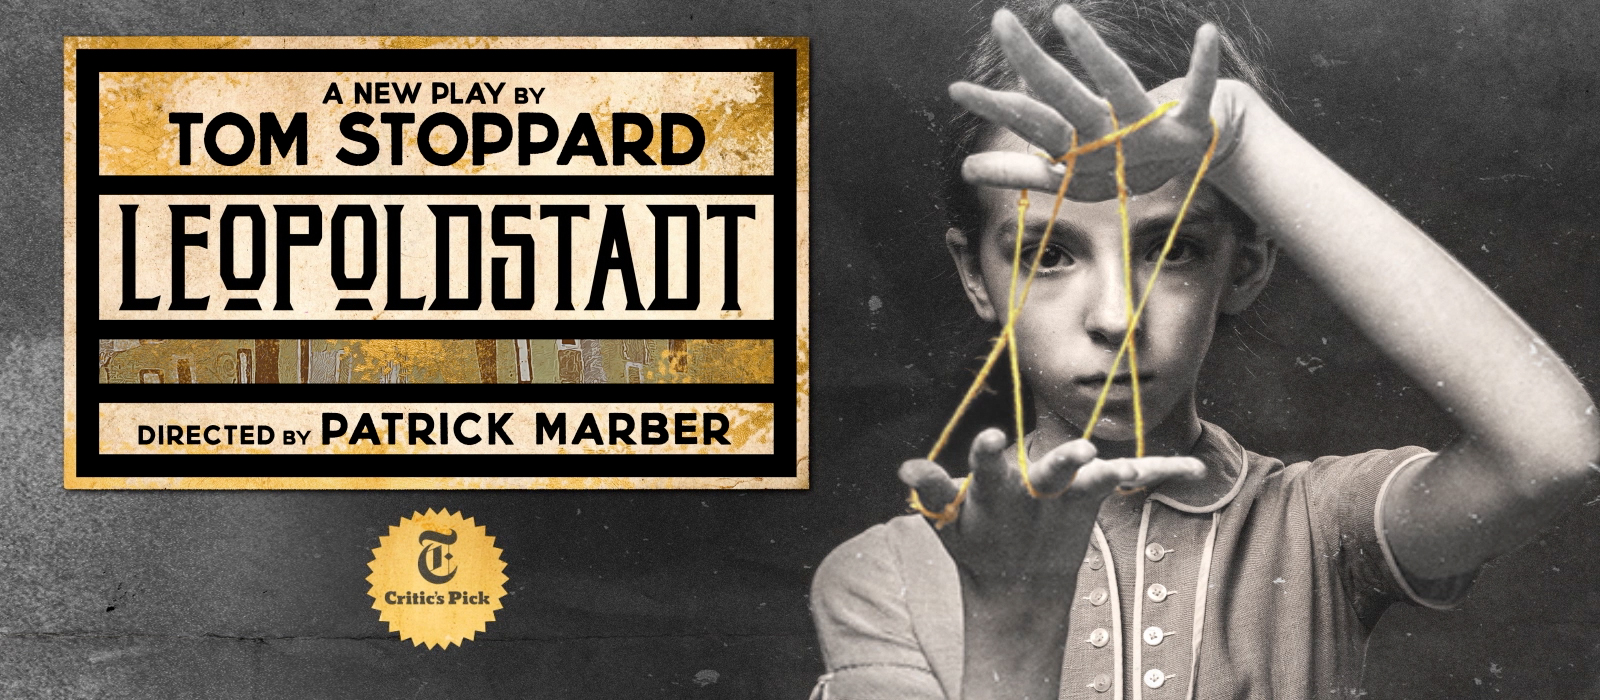 Leopoldstadt | A New Play by Tom Stoppard